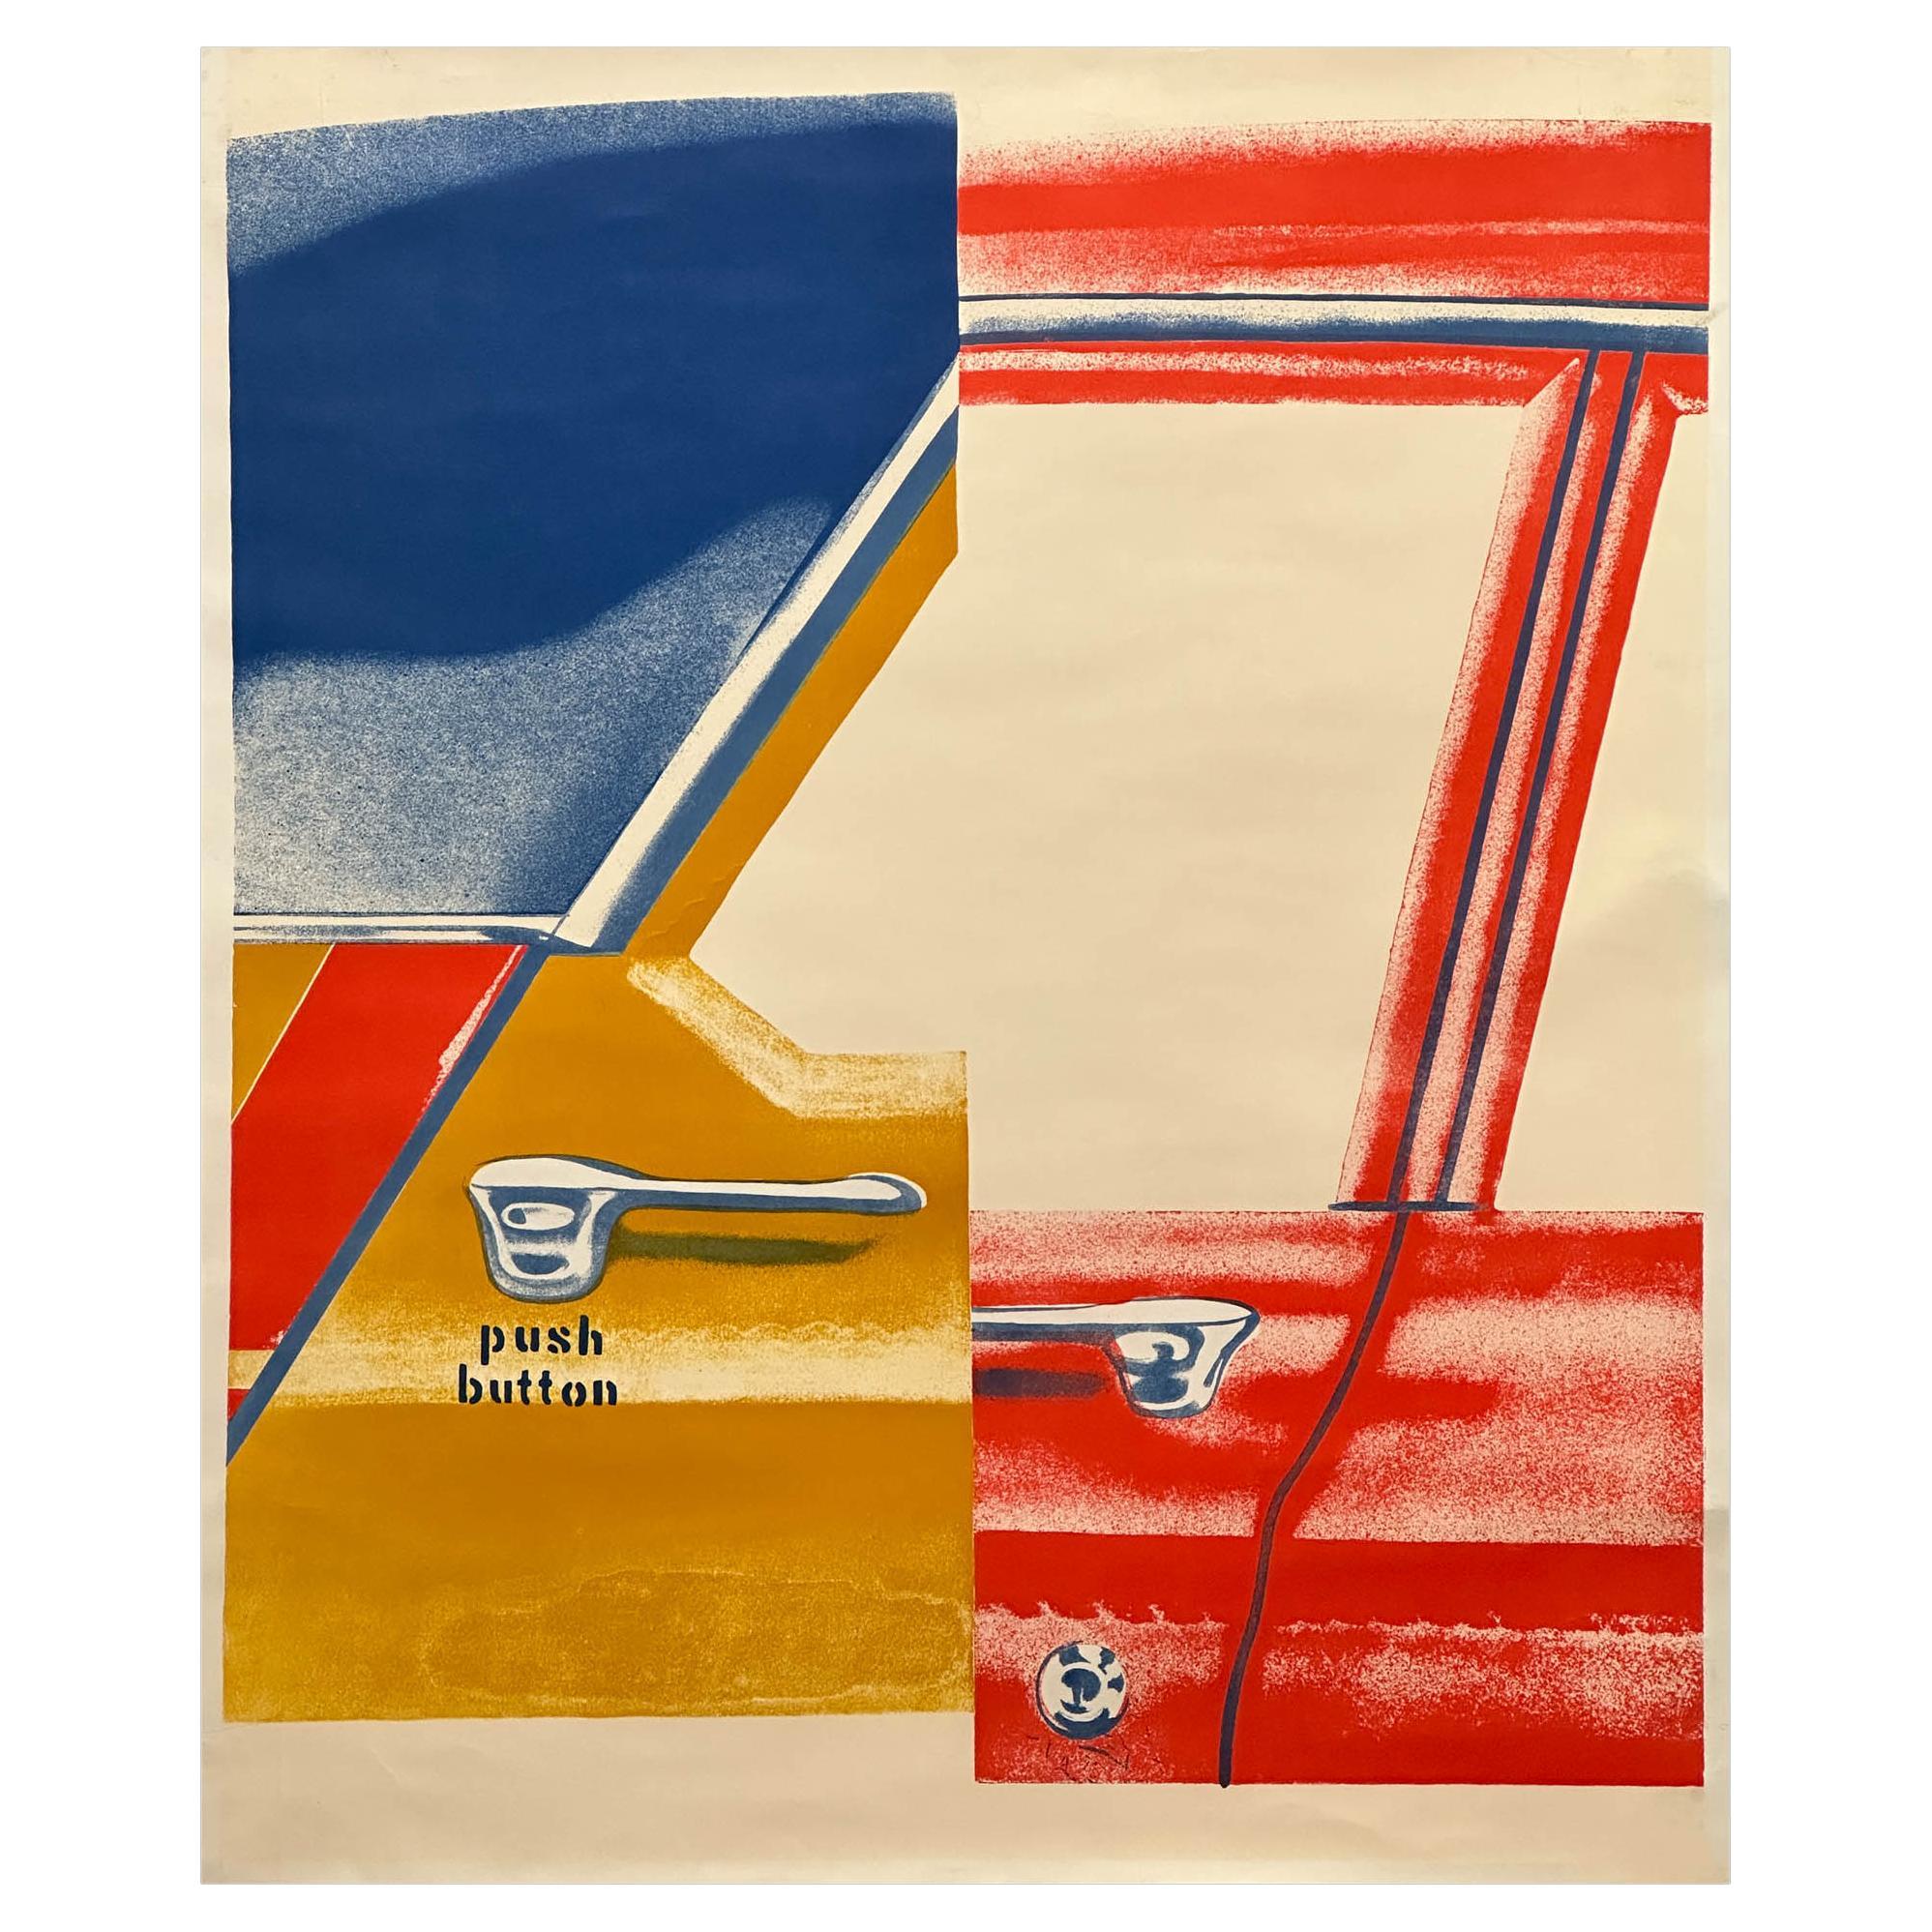 “Roll Down” 1965 Rosenquist Lithograph 18×22 For Sale